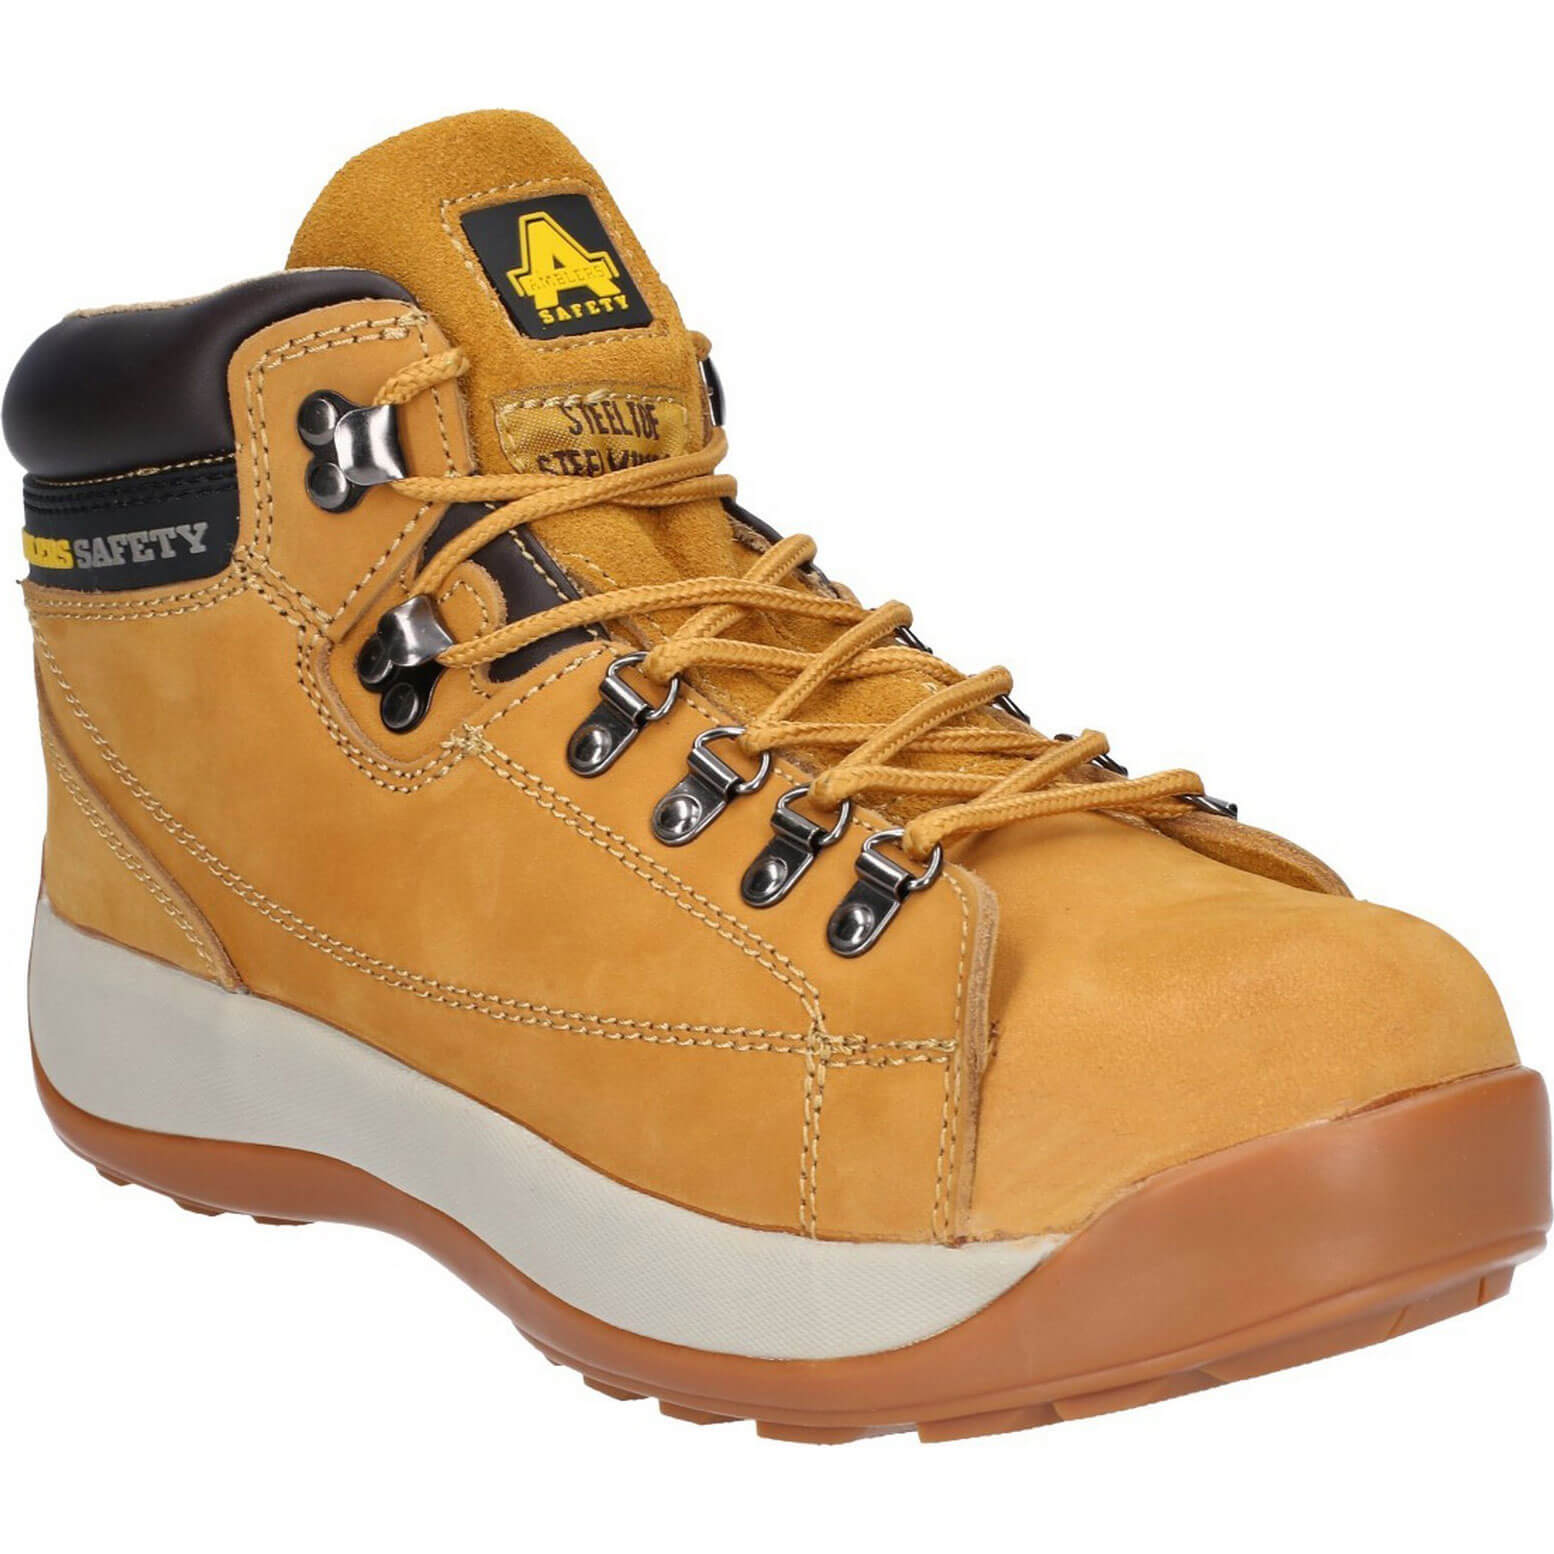 Photo of Amblers Mens Safety Fs122 Hardwearing Safety Boots Honey Size 9